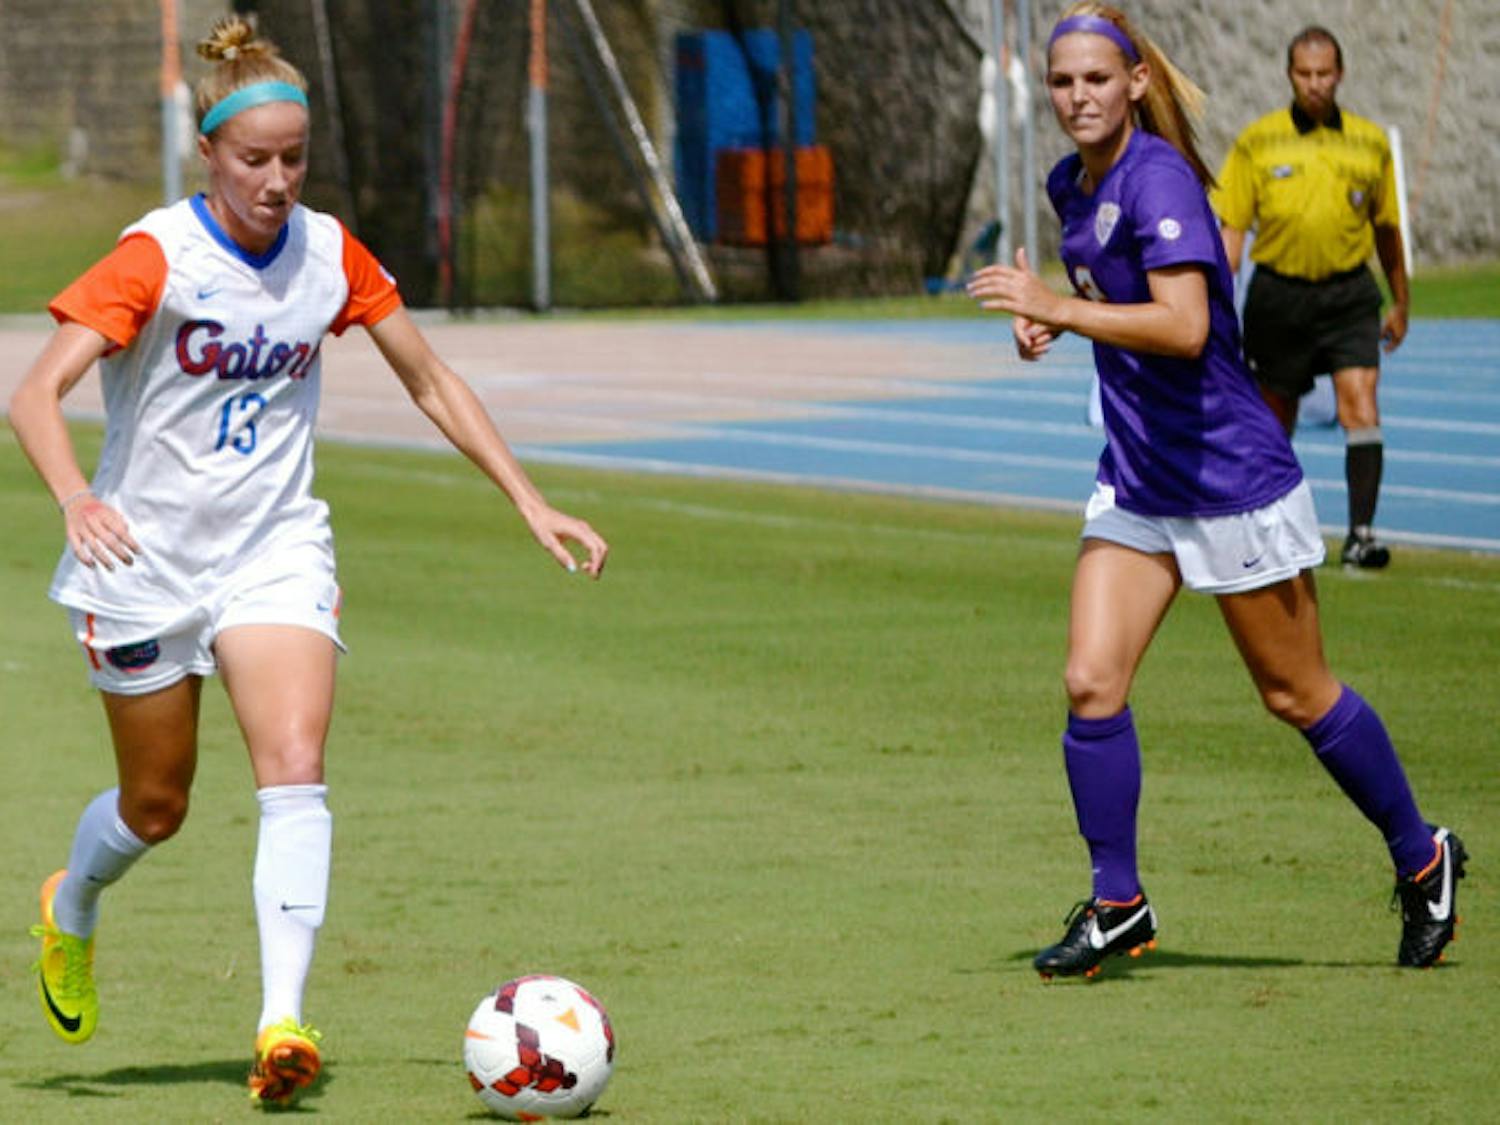 Annie Speese dribbles the ball during Florida’s 3-0 victory against LSU on Sunday afternoon at James G. Pressly Stadium. The junior midfielder scored from a free kick during the 62nd minute — her first goal of the 2013 season.